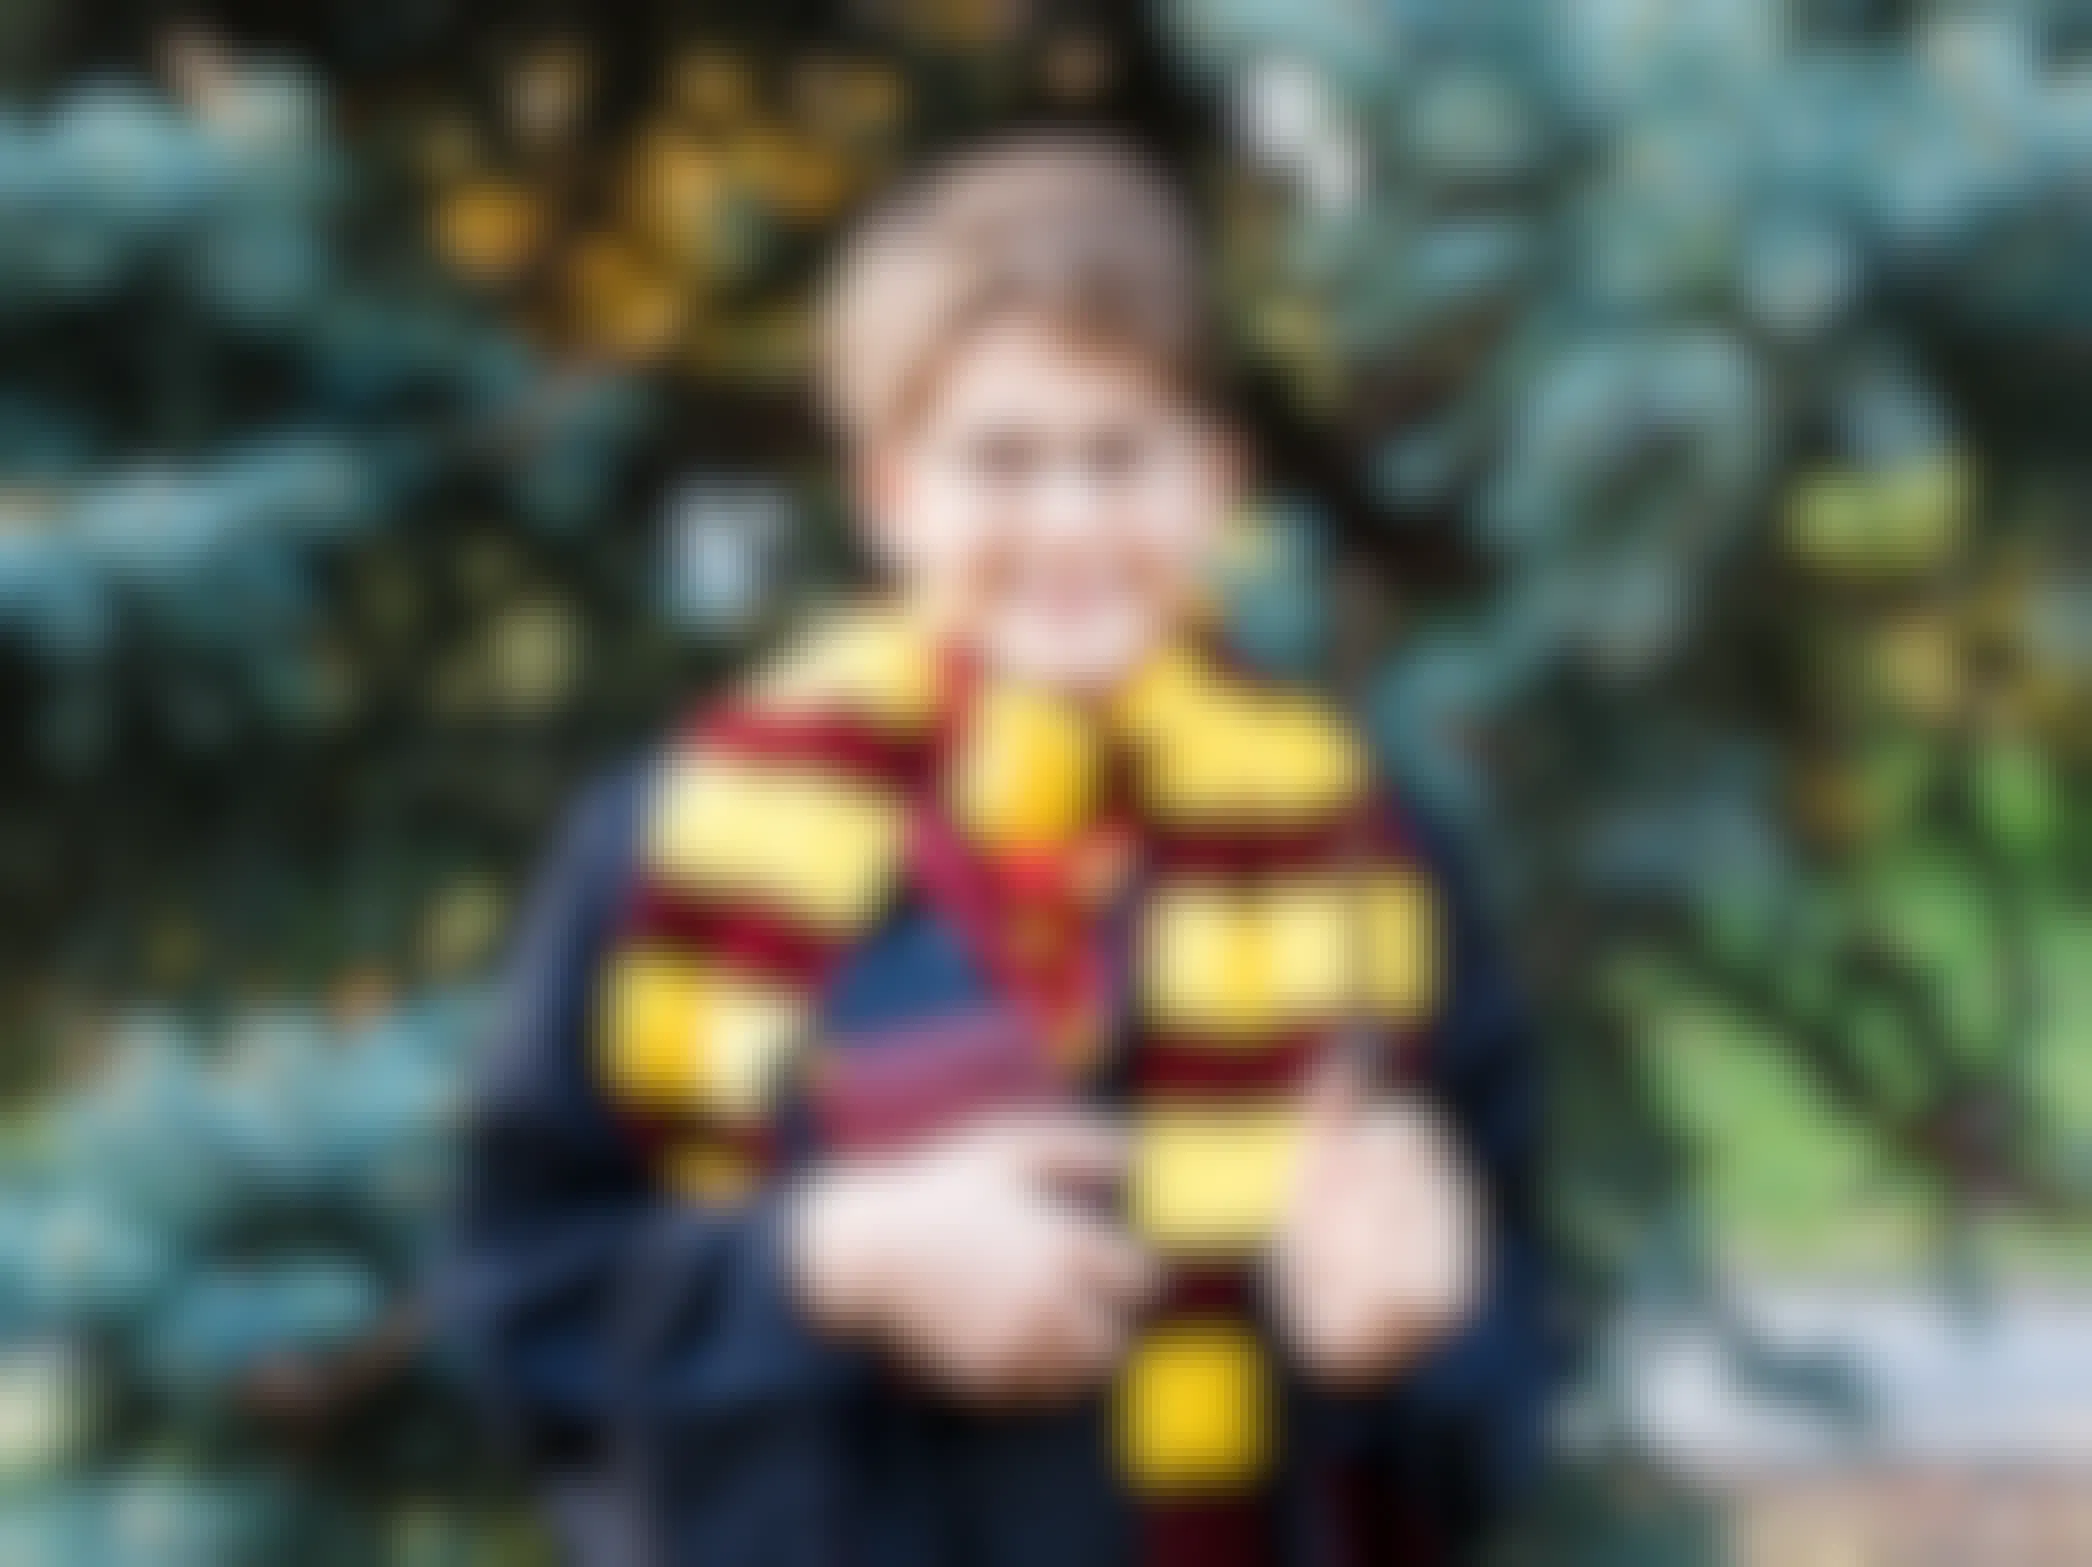 A kid dressed as Harry Potter standing outside and holding a wand and books.